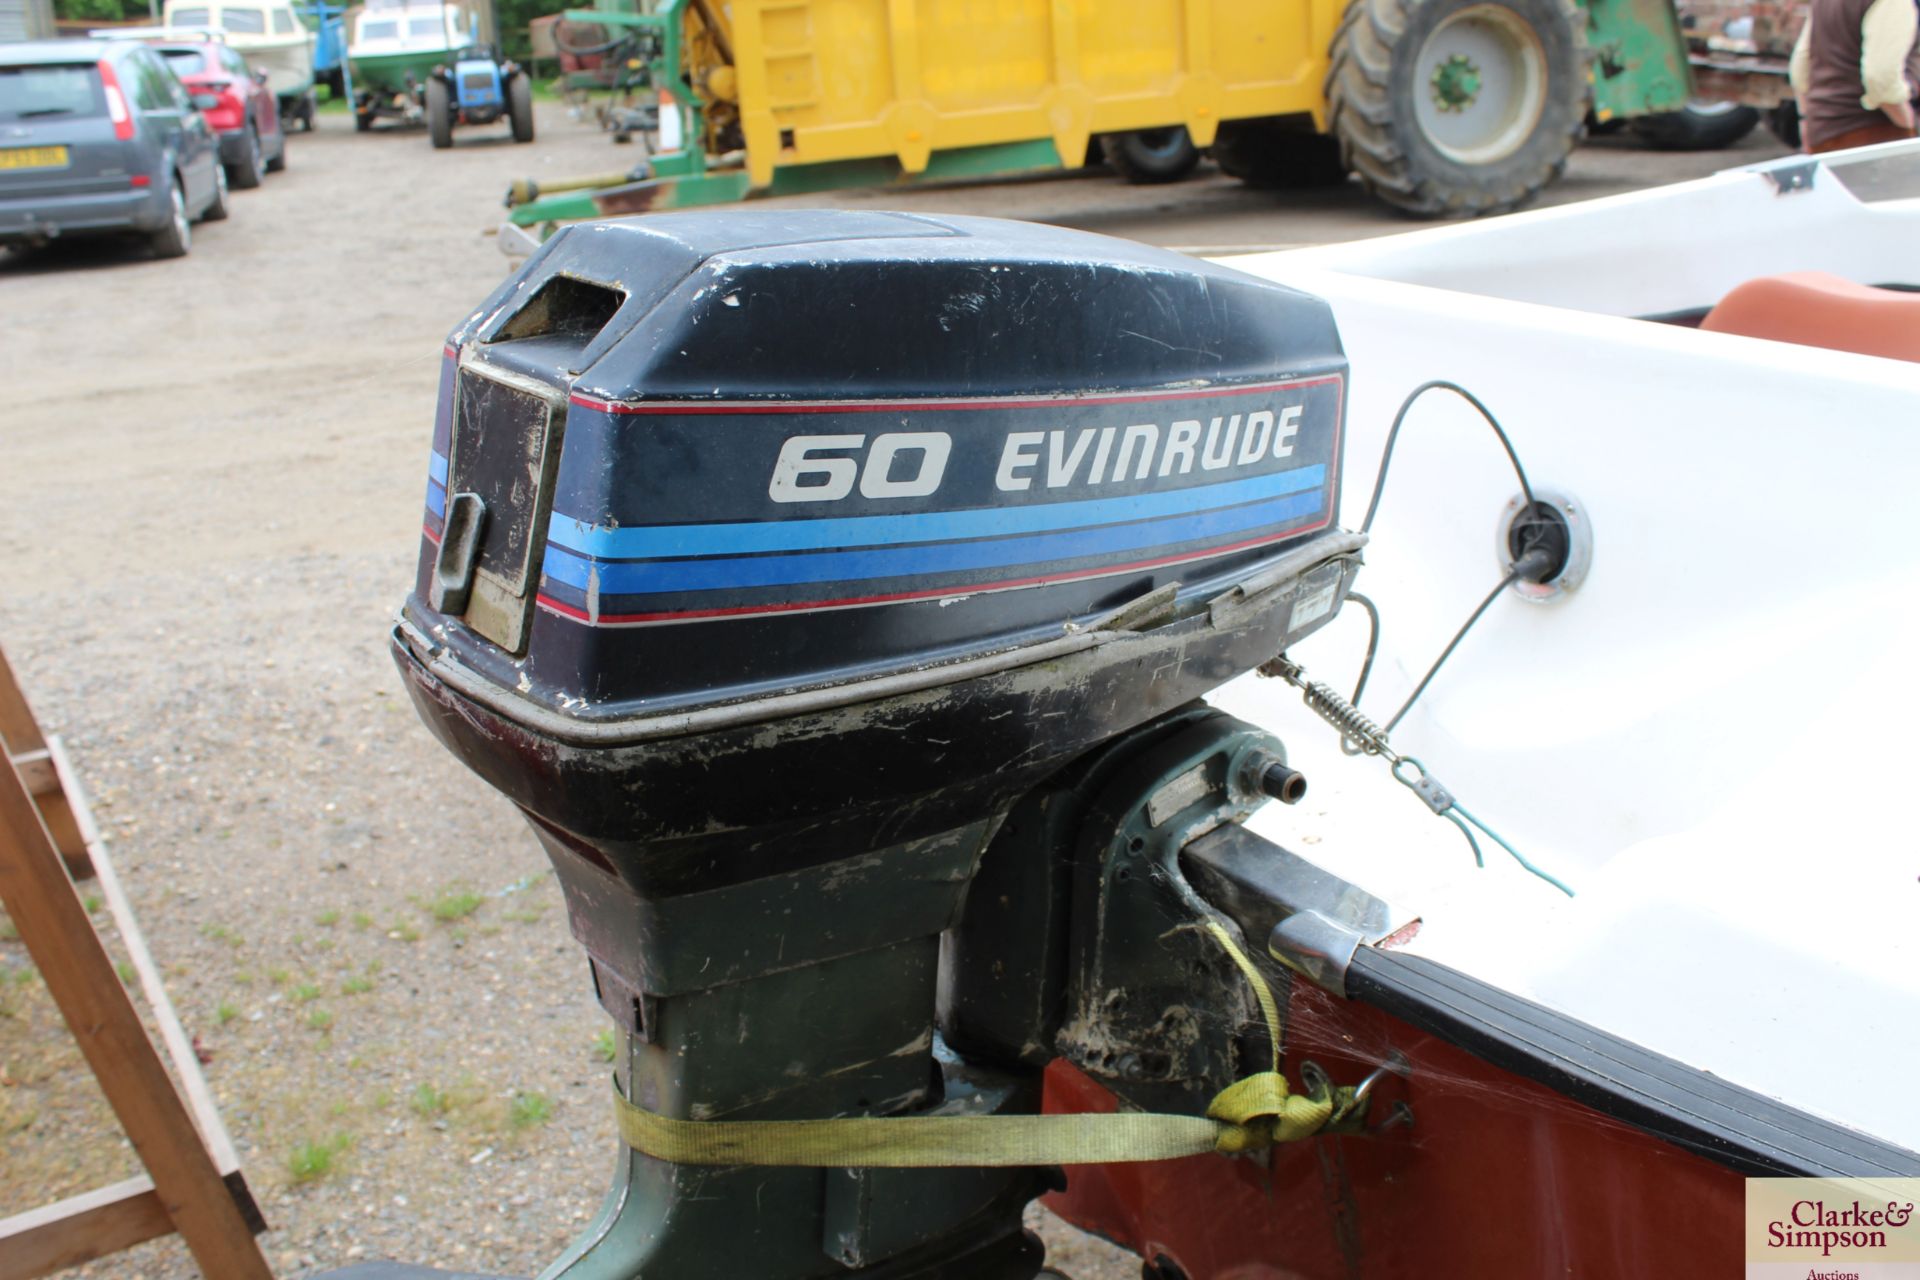 13ft speedboat. With Evinrude 60HP outboard (runs and pumps water), trailer, water skis, knee board, - Image 6 of 17